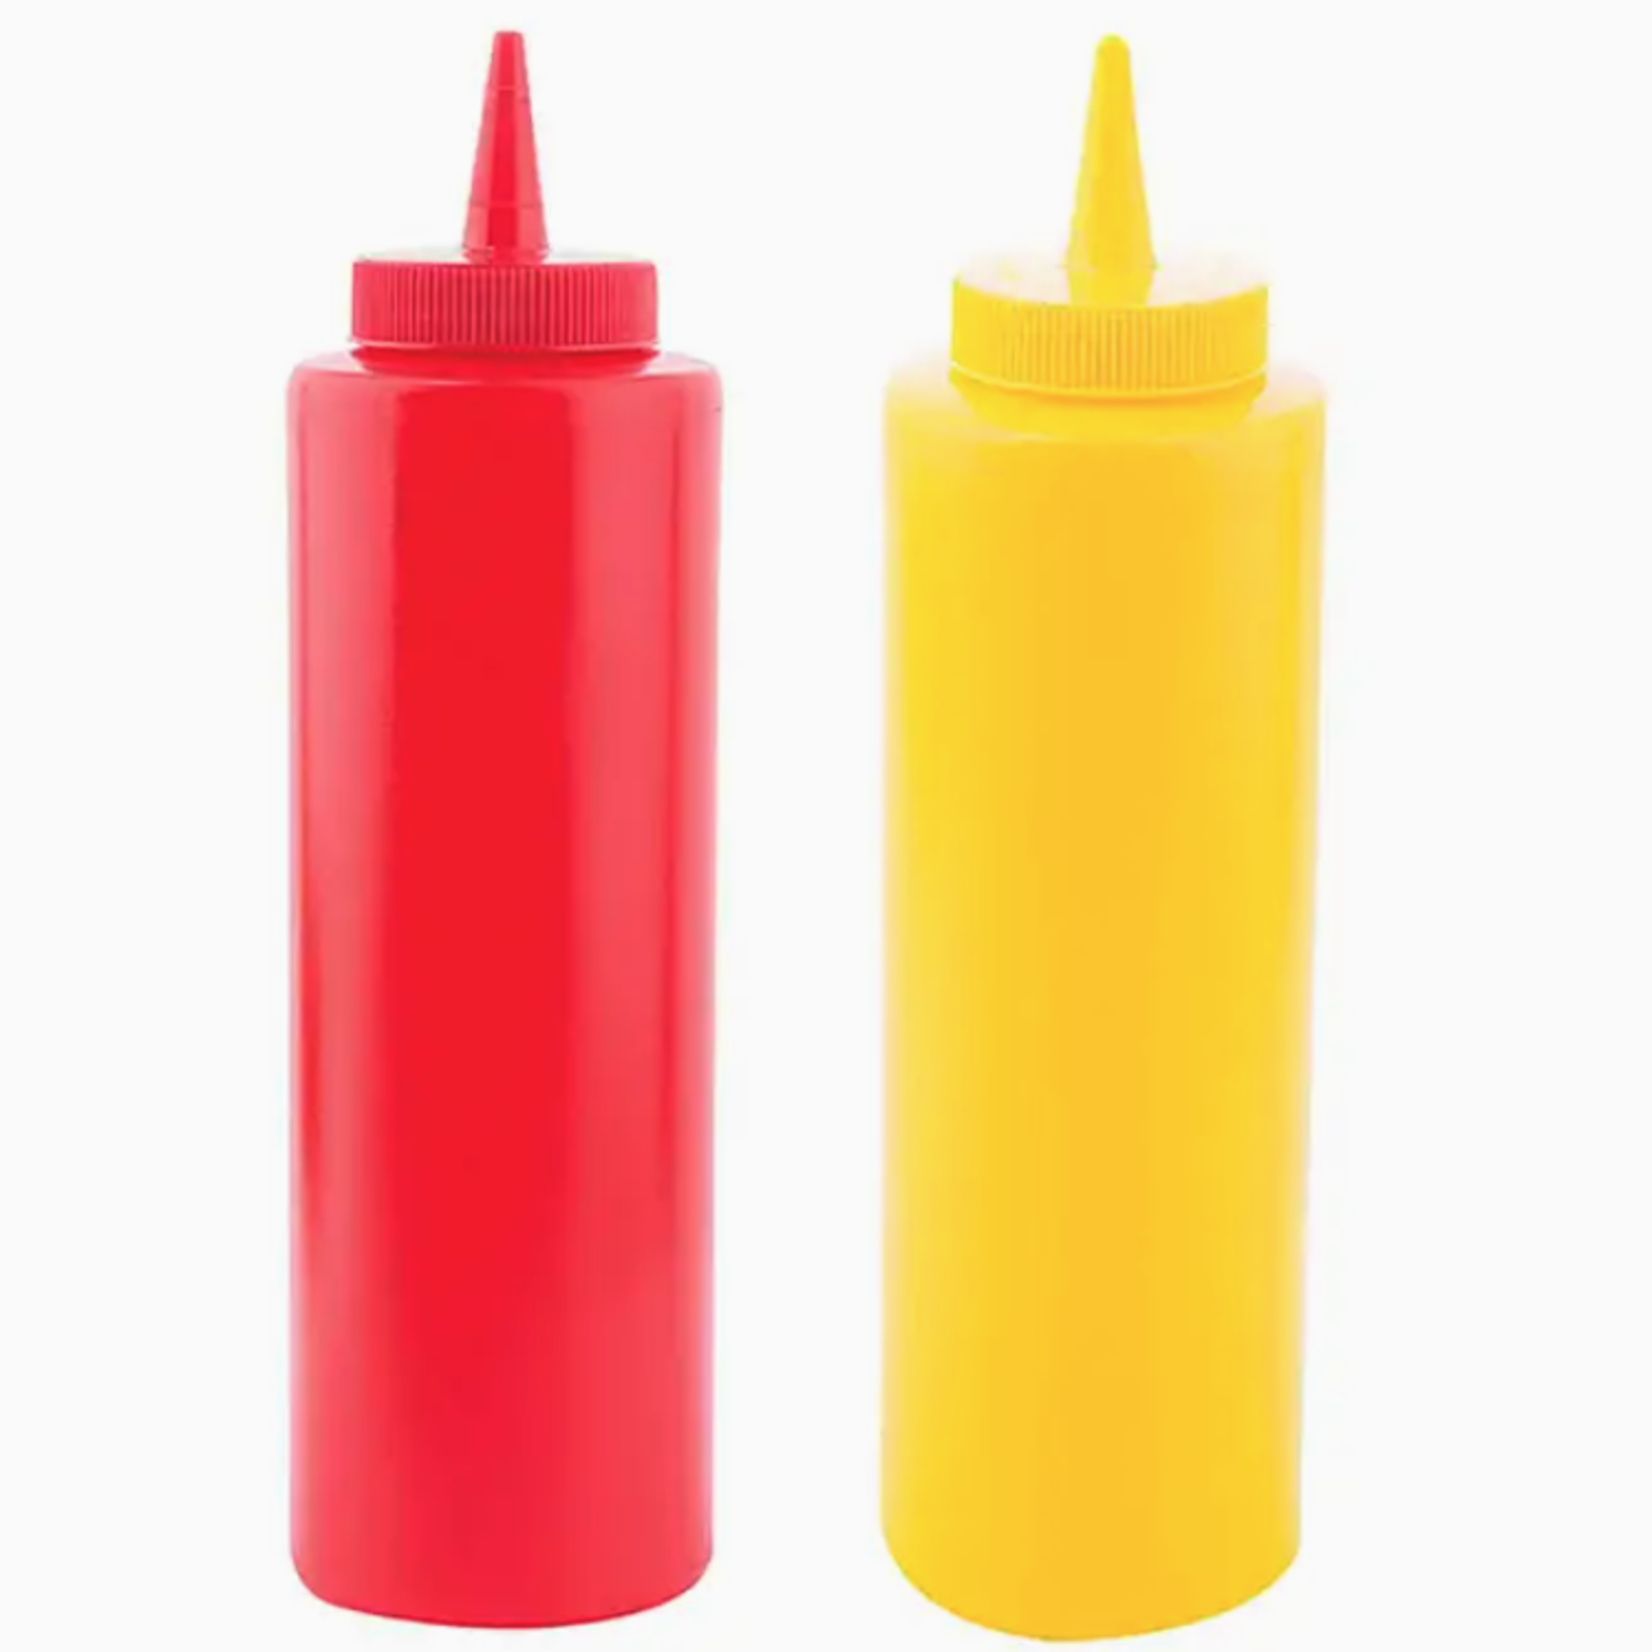 Tablecraft 12 oz Squeeze Bottles, Red & Yellow, Set of 2